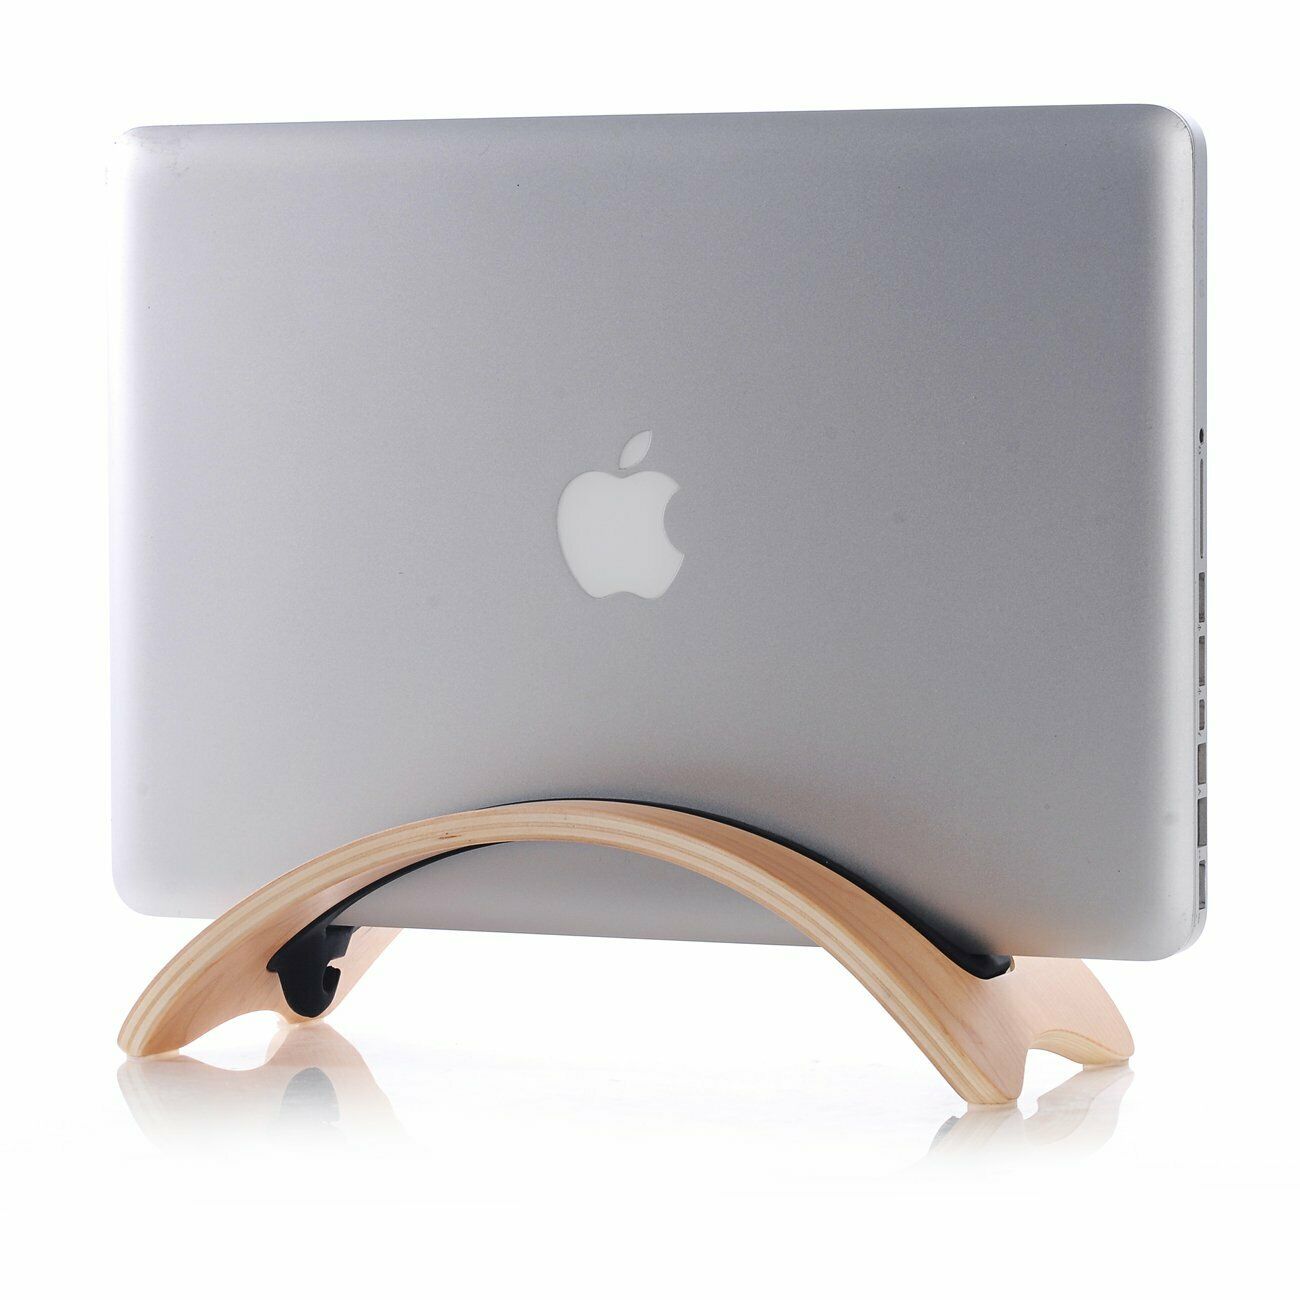 Wooden Stand for MacBook 🌳 Natural Wood. ♻️ Eco-friendly. ✈️ Free Worldwide Shipping. 🎁 Perfect Gift.